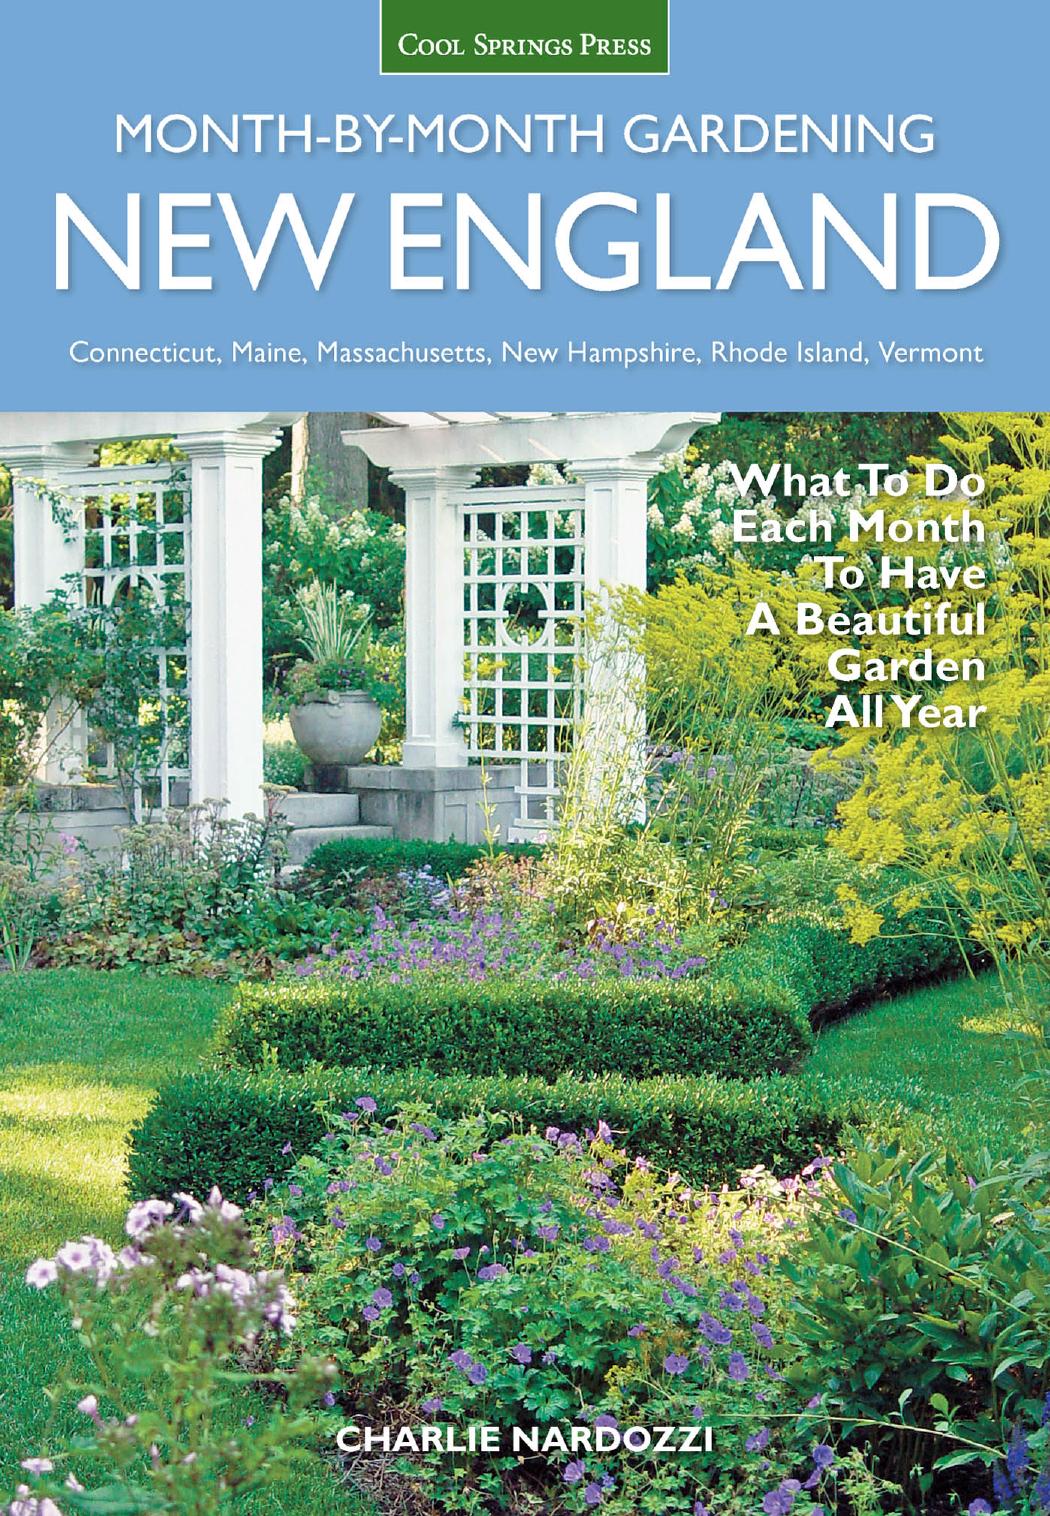 New England Month-By-Month Gardening: What to Do Each Month to Have a Beautiful Garden All Year - Connecticut, Maine, Massachusetts, New Hampshire, Rhode Island, Vermont by Charlie Nardozzi